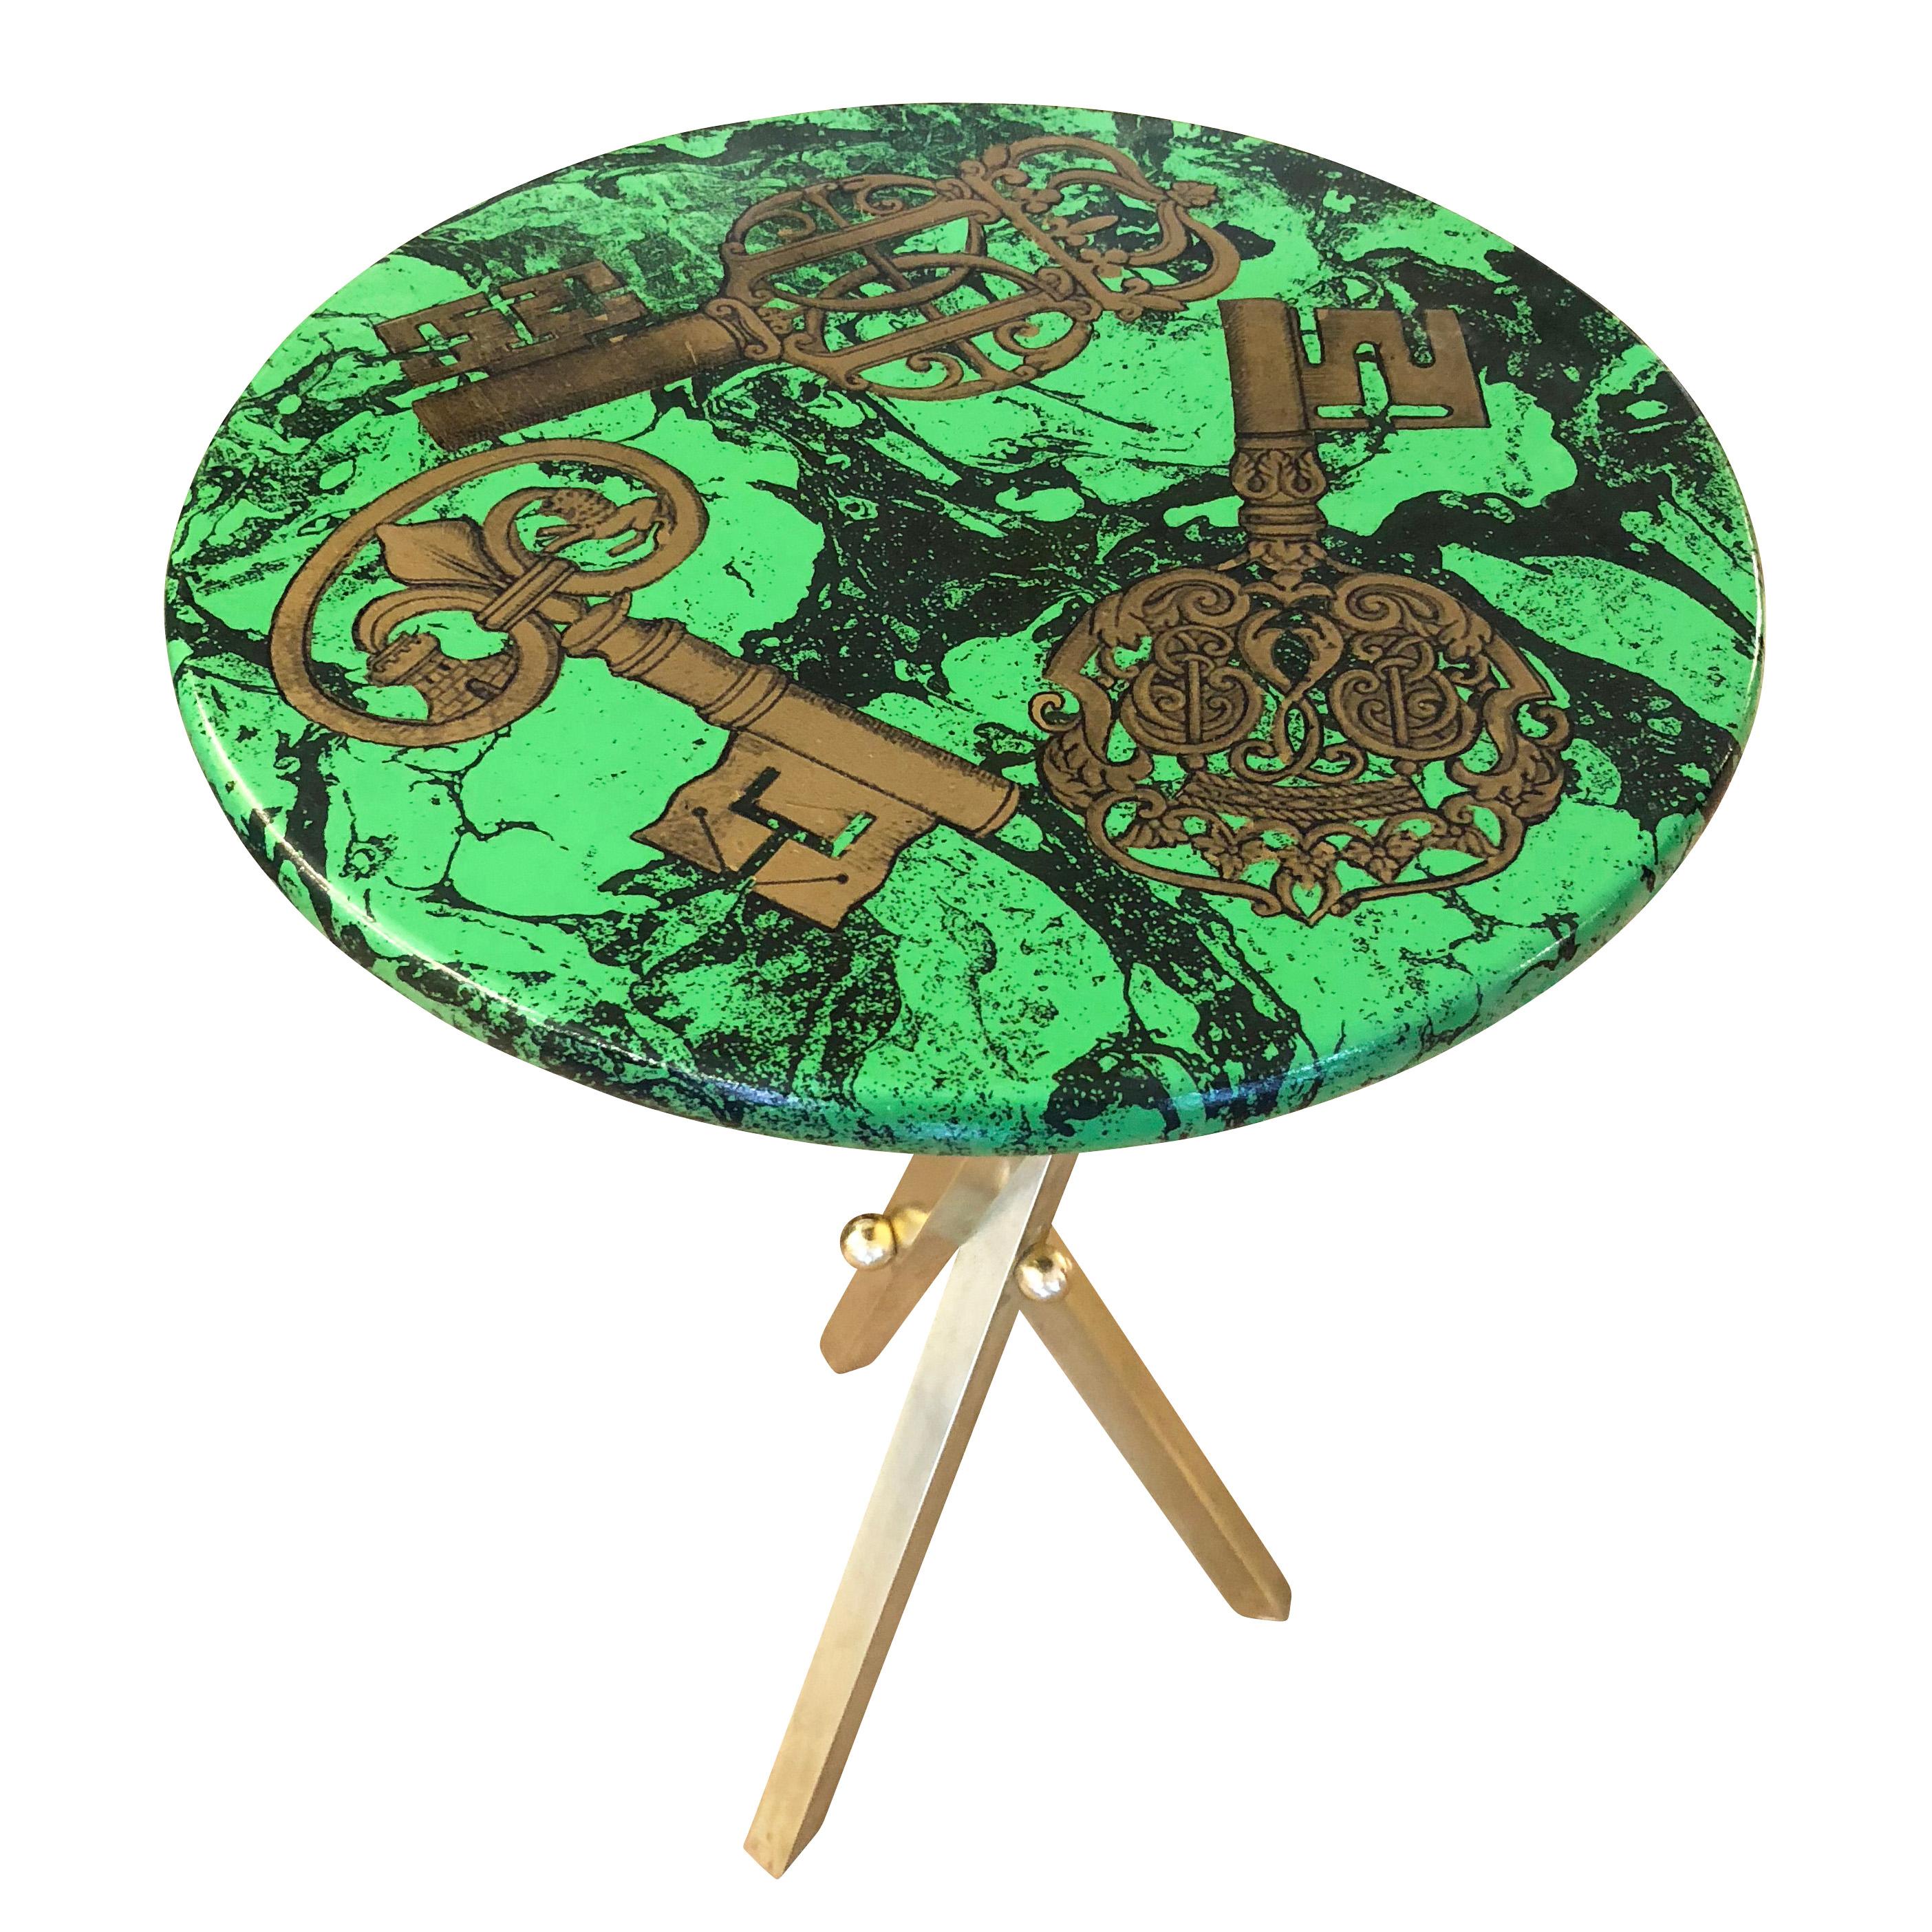 “Chiavi” side table by Piero Fornasetti depicting ancient keys on a green marble background. Brass tripod base. Original label below top.

Condition: Excellent vintage condition, minor wear consistent with age and use

Measures: Diameter